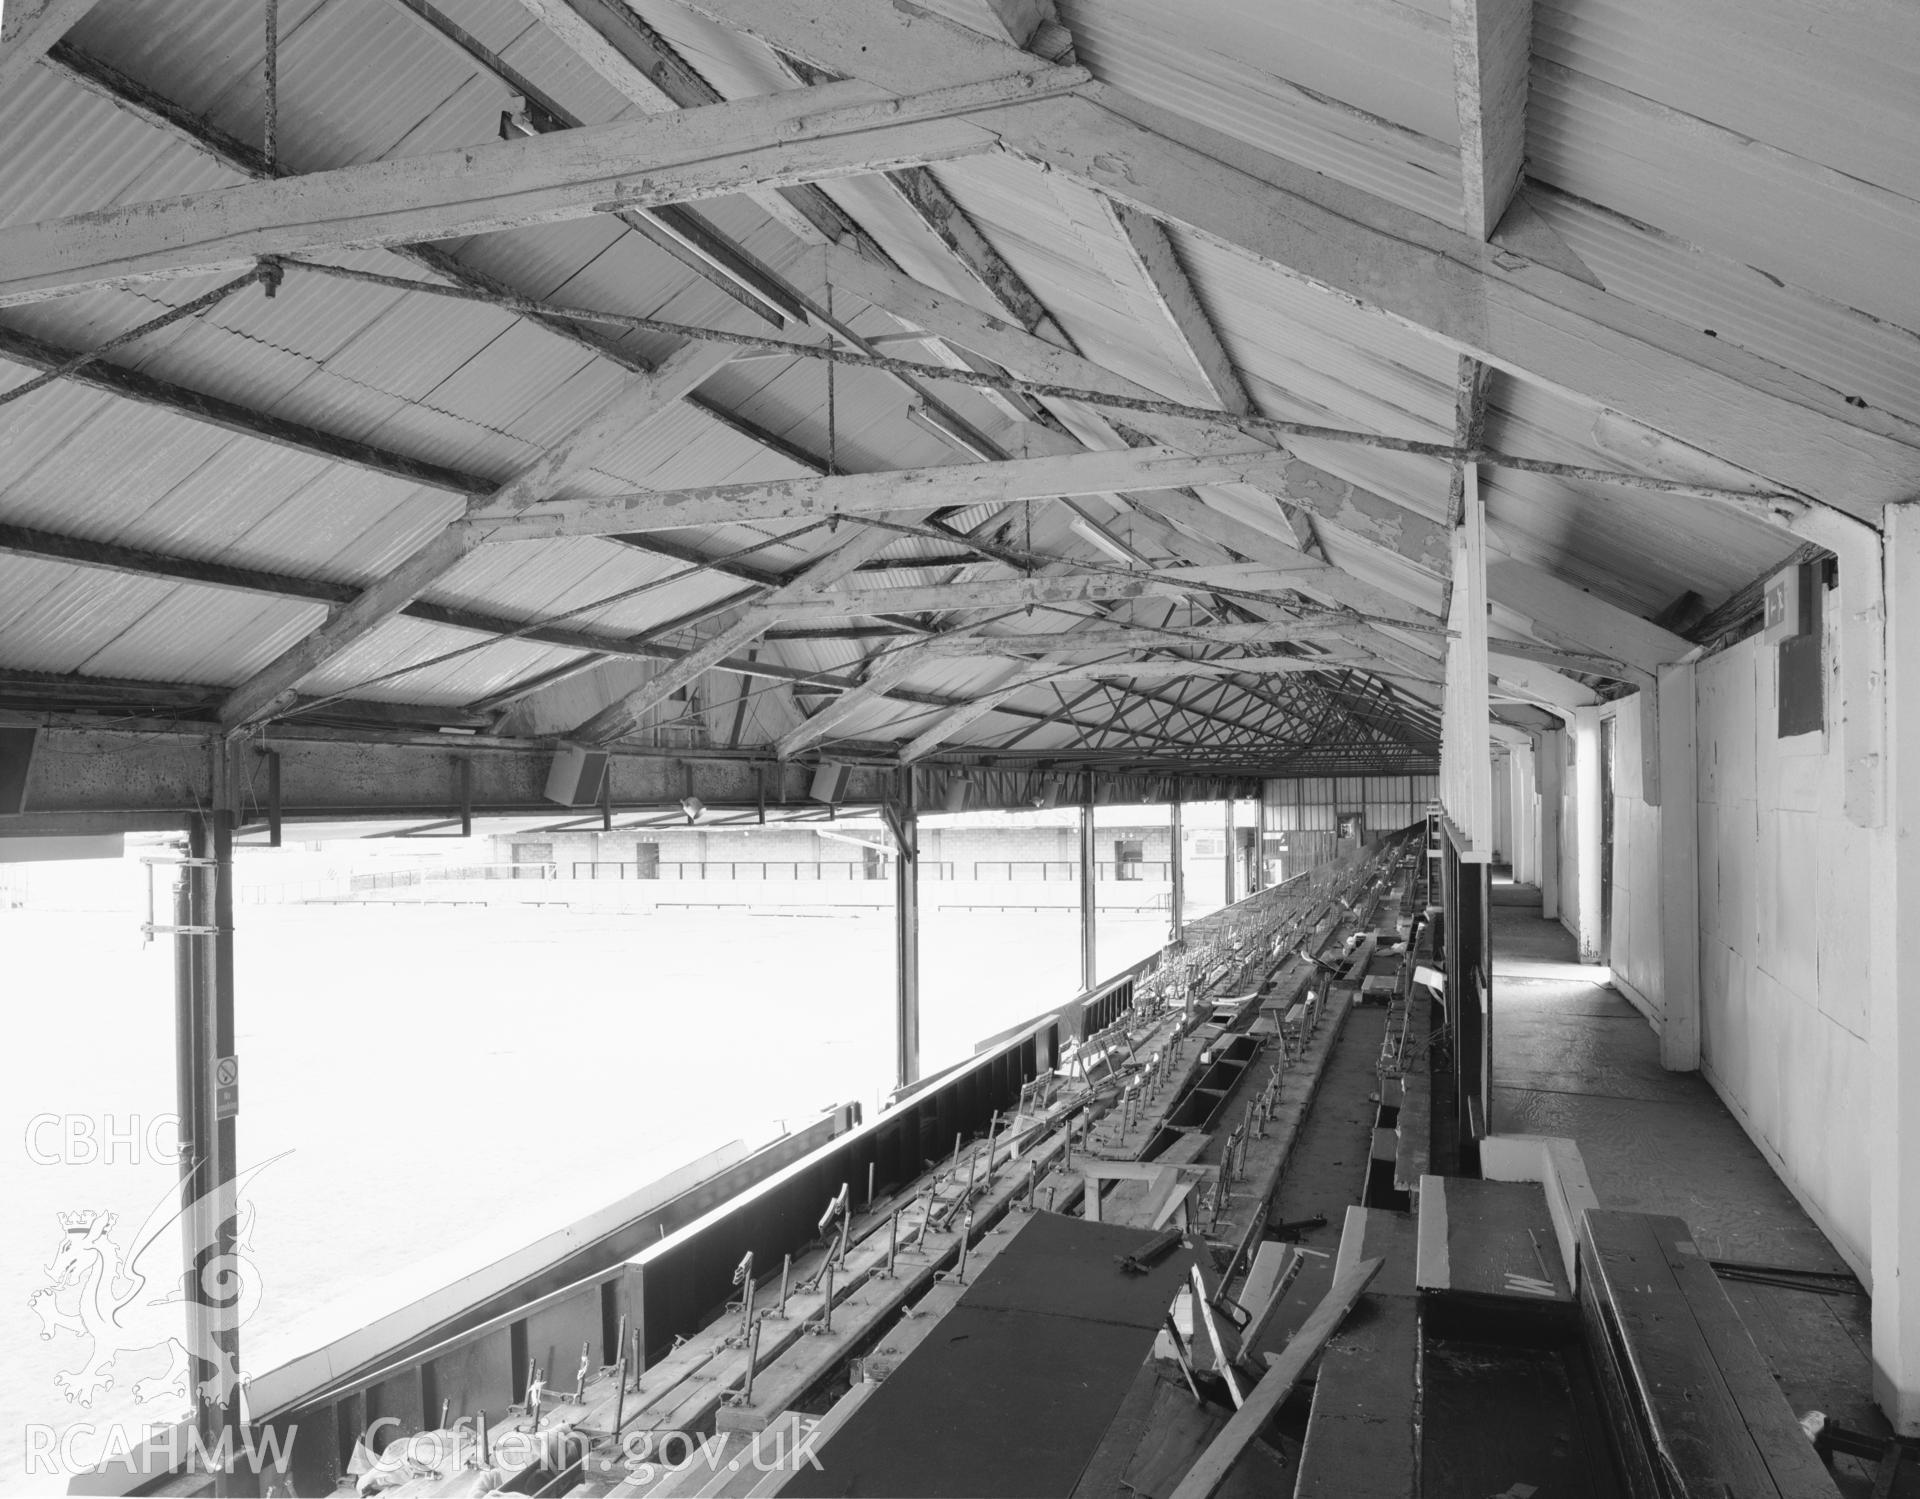 South Stand, Interior roof structure from southwest.